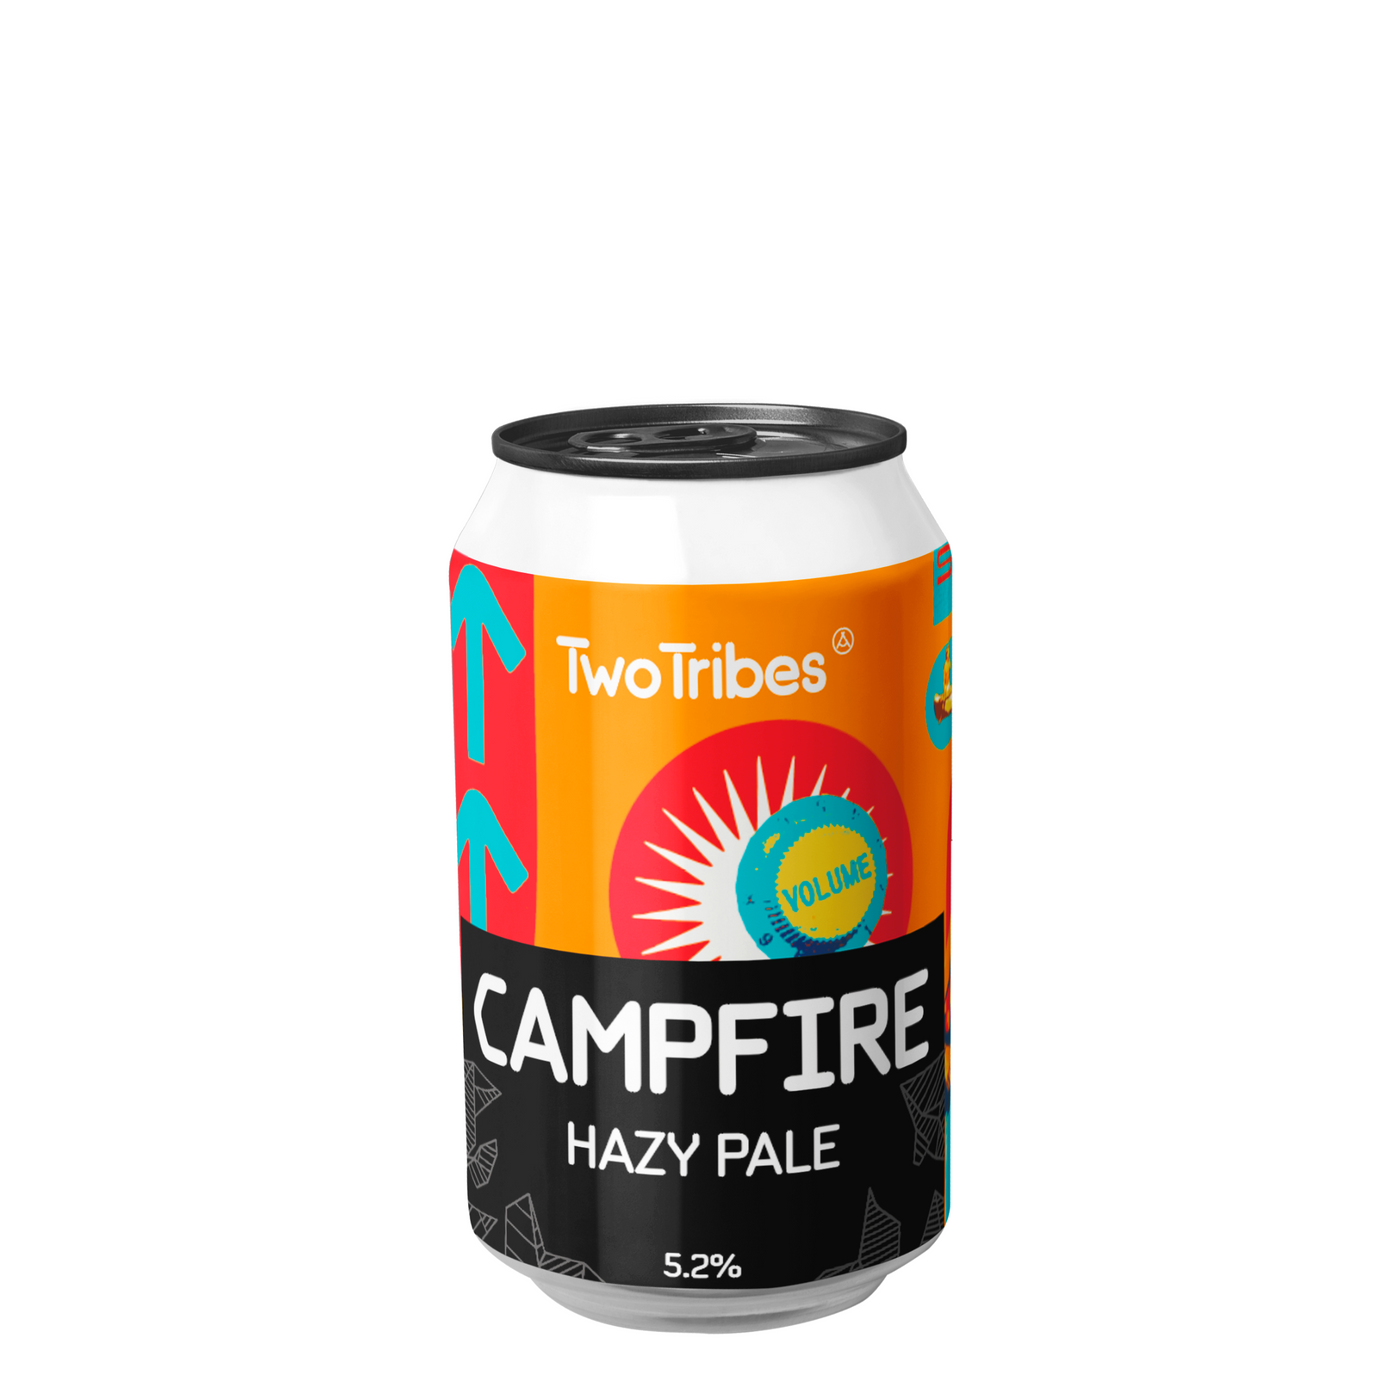 Two Tribes Campfire Hazy Pale